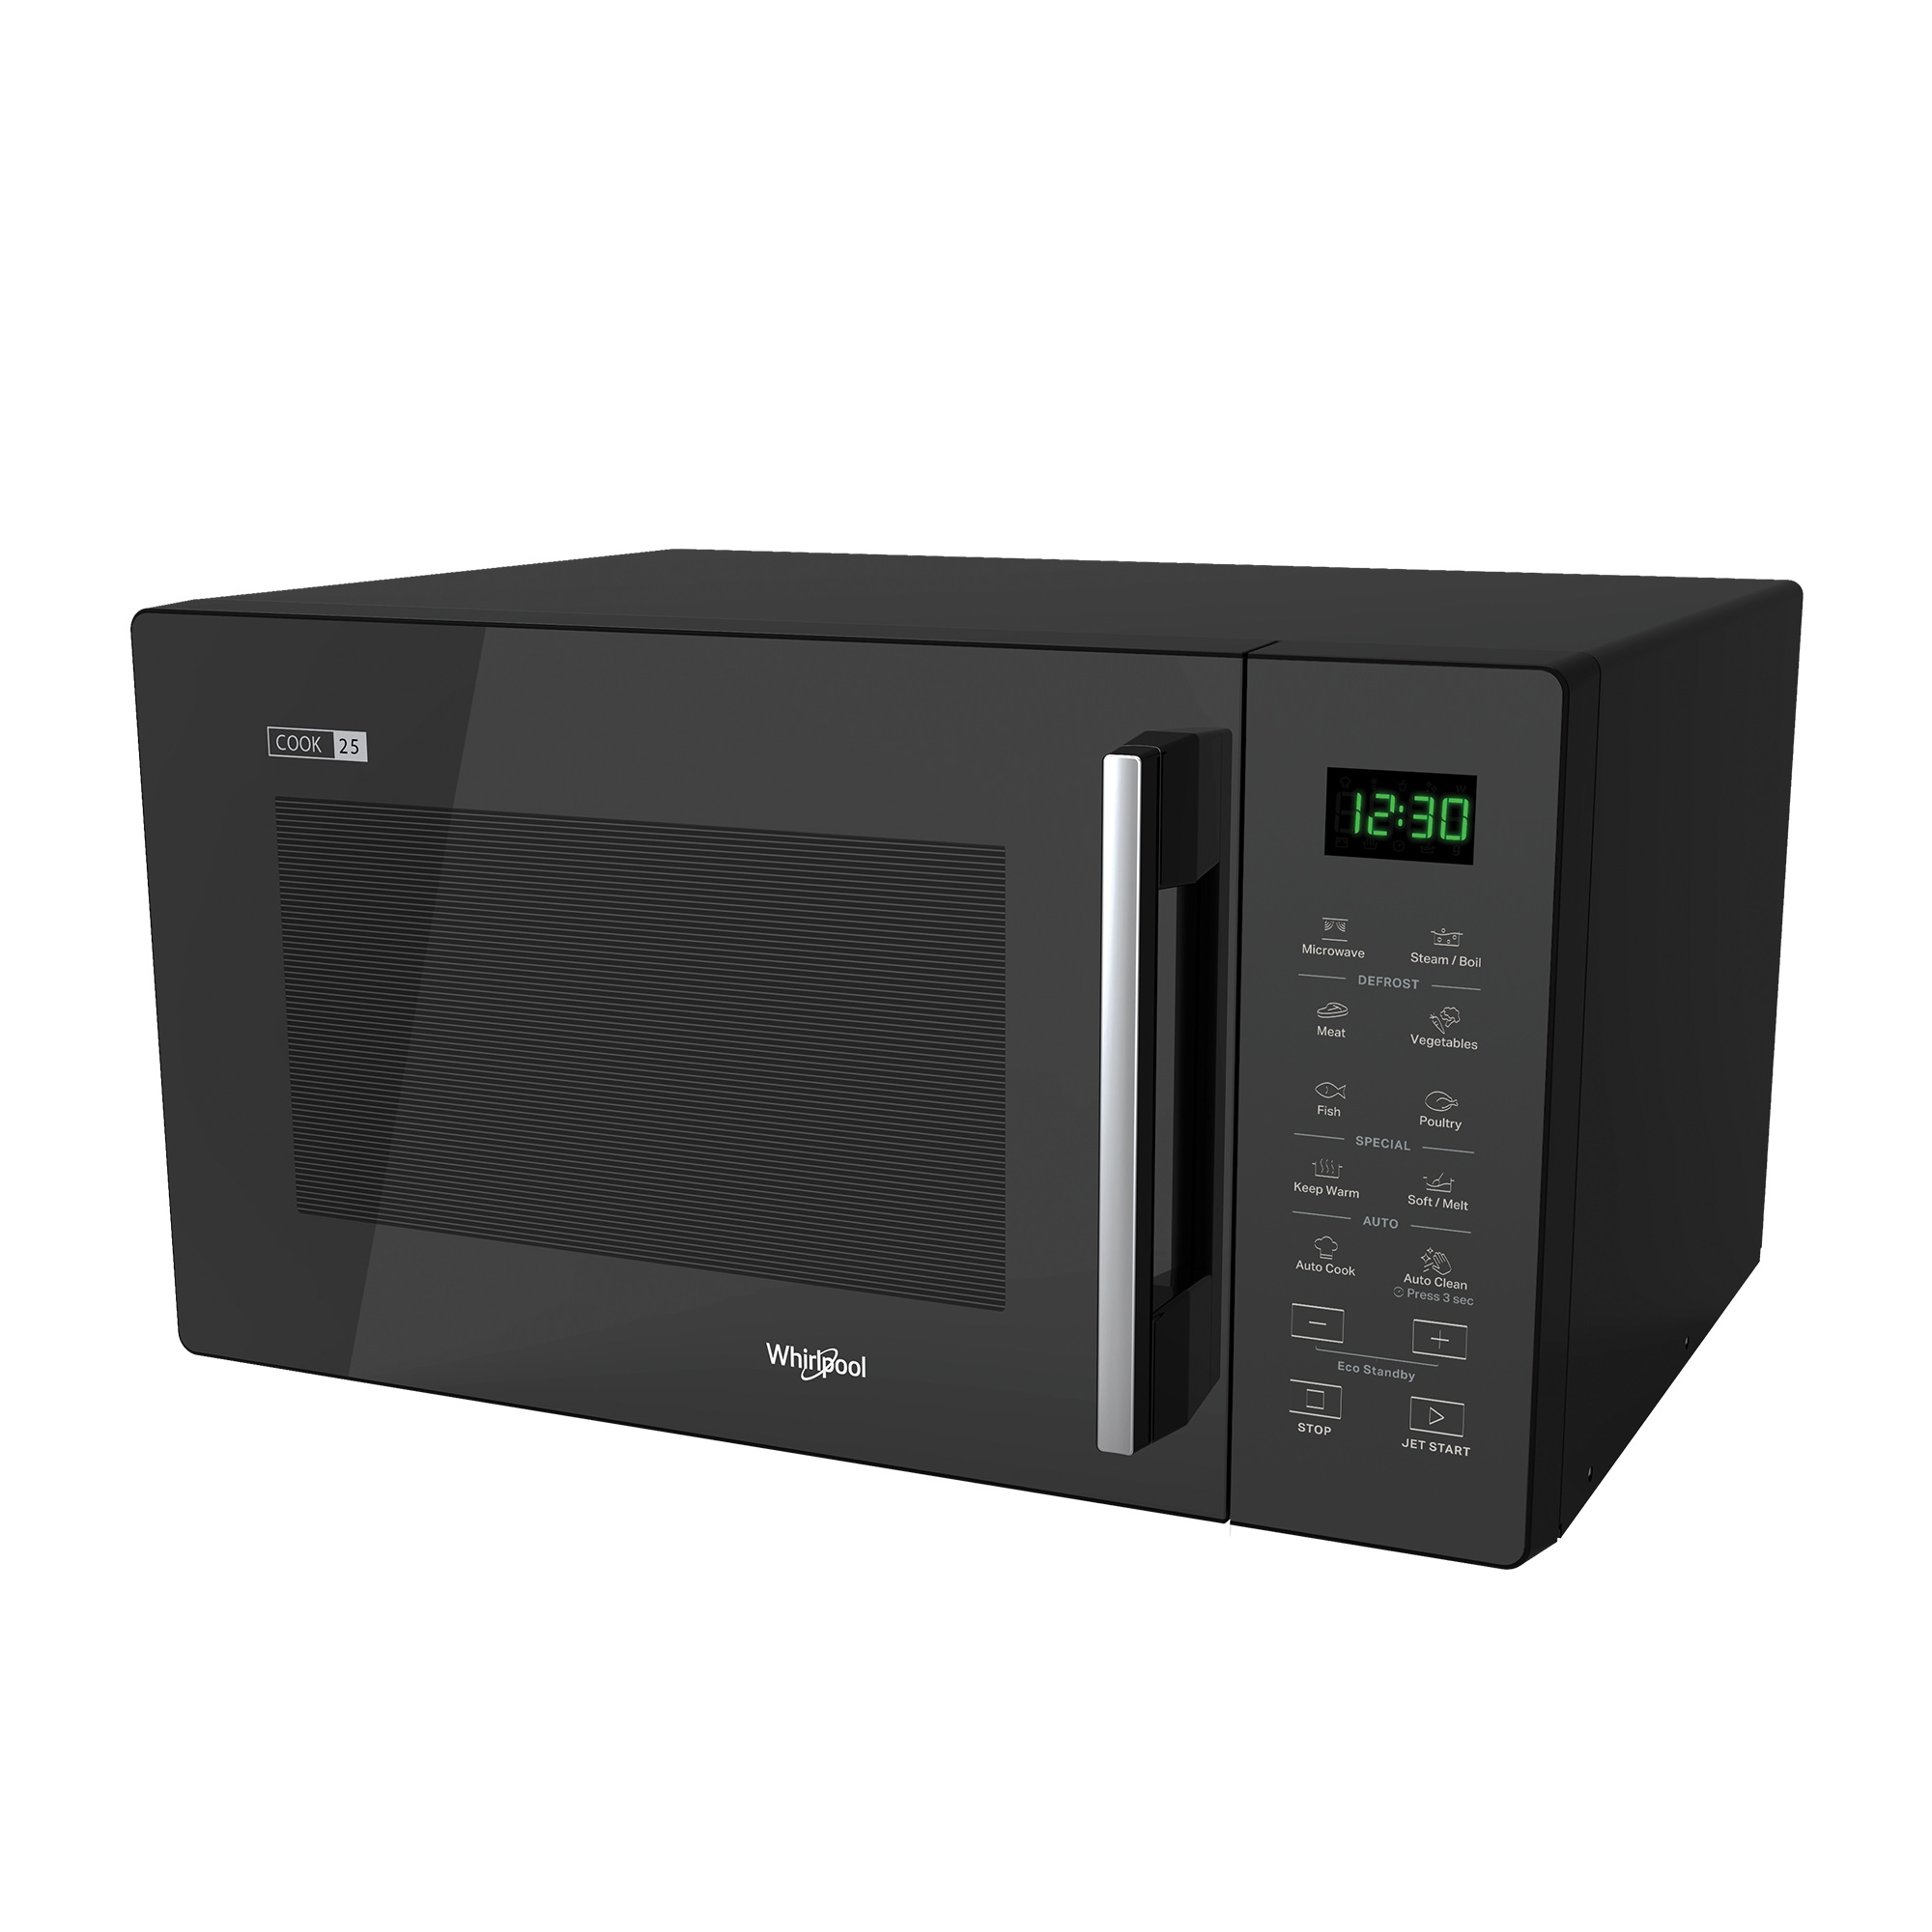 Whirlpool Microwave Oven 25L Black Image 1